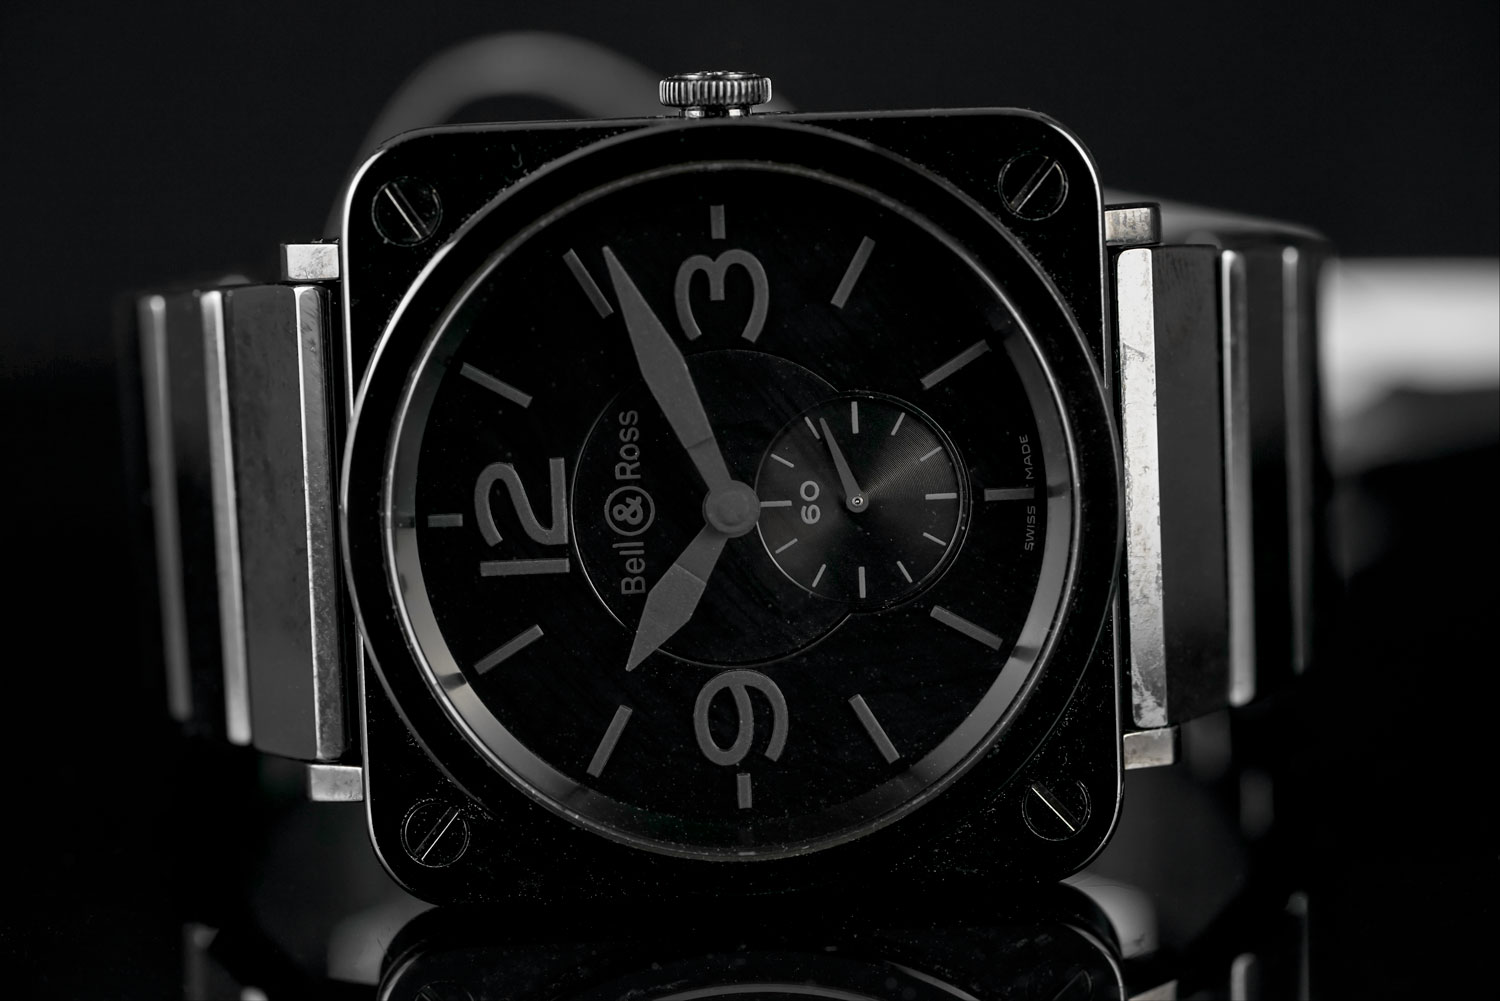 GENTLEMEN'S BELL & ROSS PHANTOM BRS-98-PBC 02308, square, black hands and dial , non date, 39mm